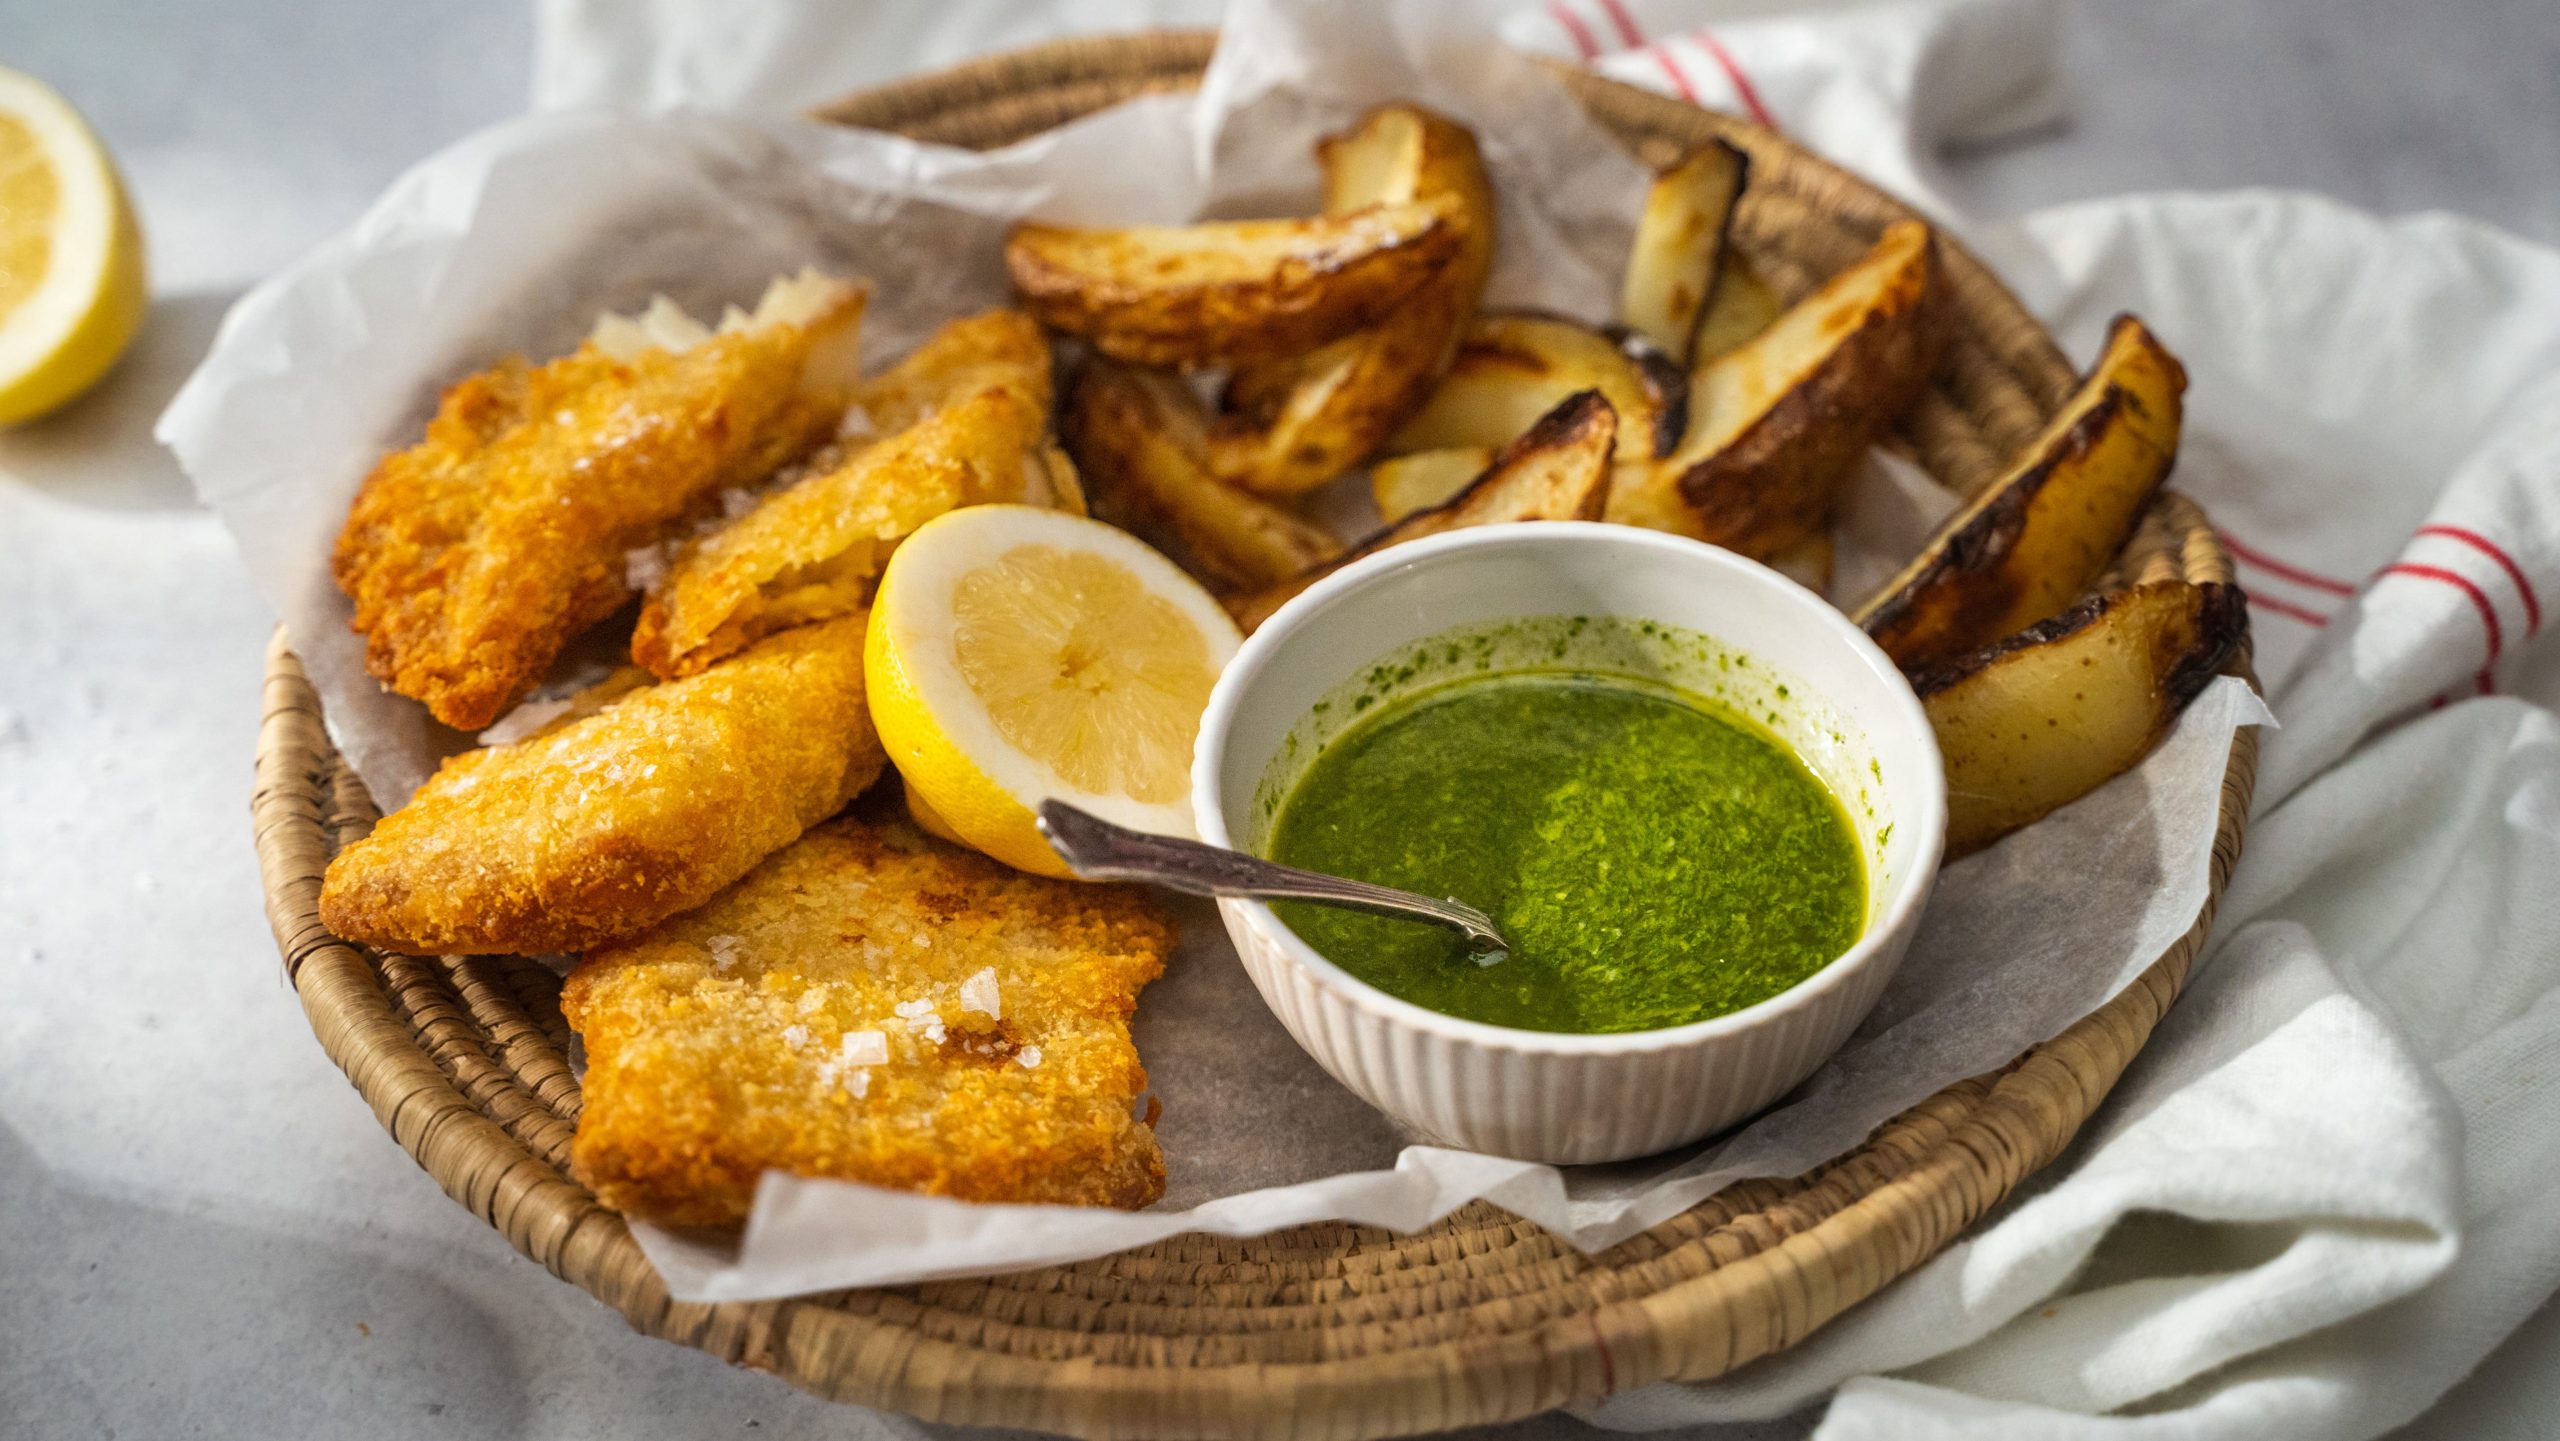 Easy lemon and herb dressing in a bowl served with crumbed fish and wedges.